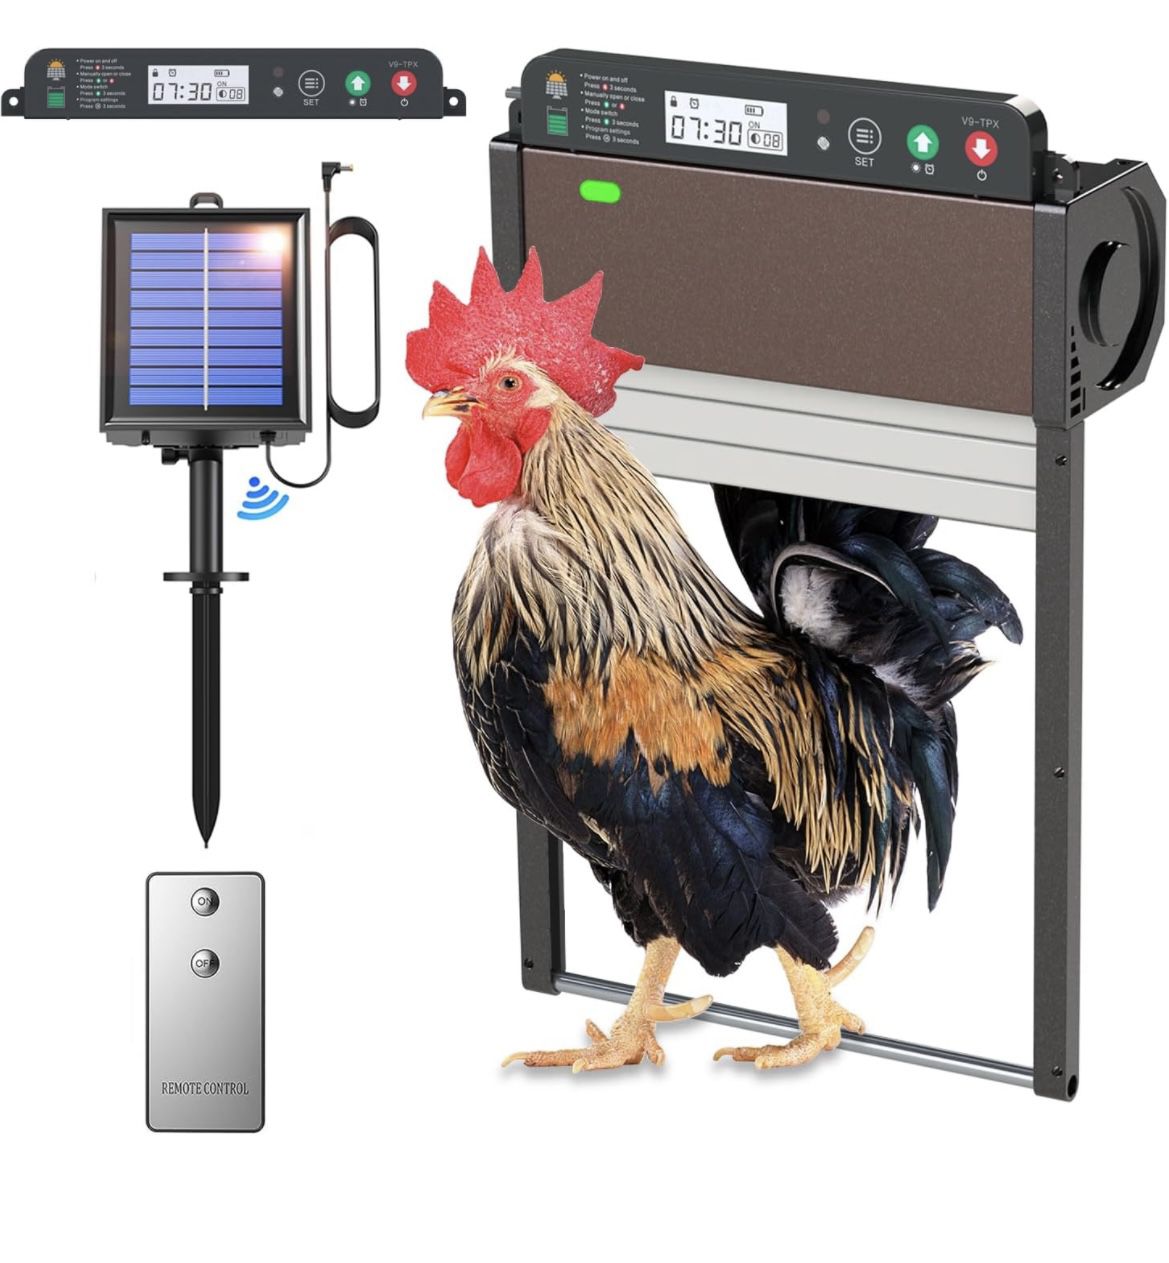 Automatic Chicken Coop Door, Auto SOLAR POWERED, Aluminum Coop Door with 4 Modes Control, Timer, Light Sensor, Anti-Pinch for Poultry, NEW!!